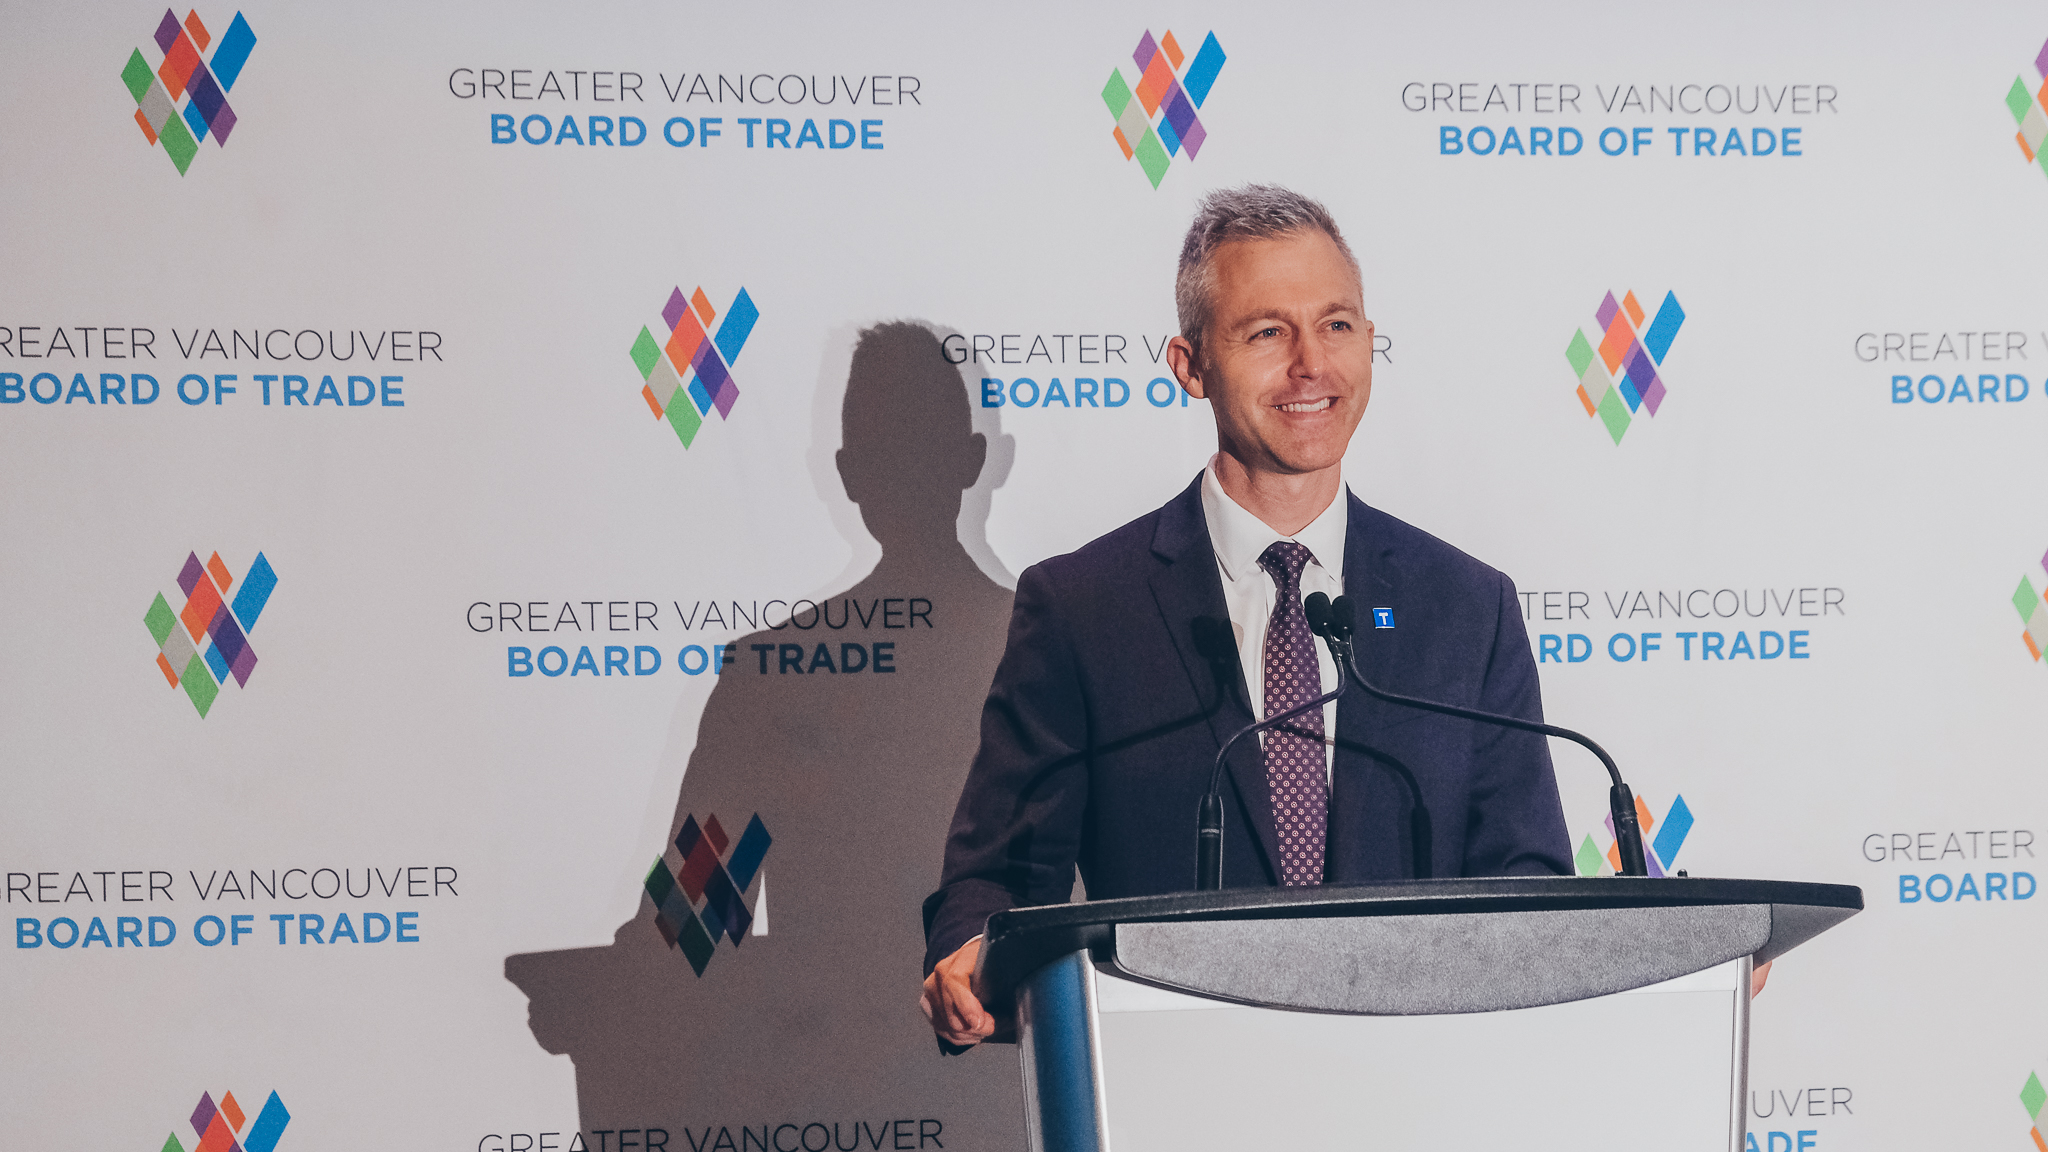 TransLink CEO Kevin Quinn delivers his keynote at the Greater Vancouver Board of Trade on November 19, 2021